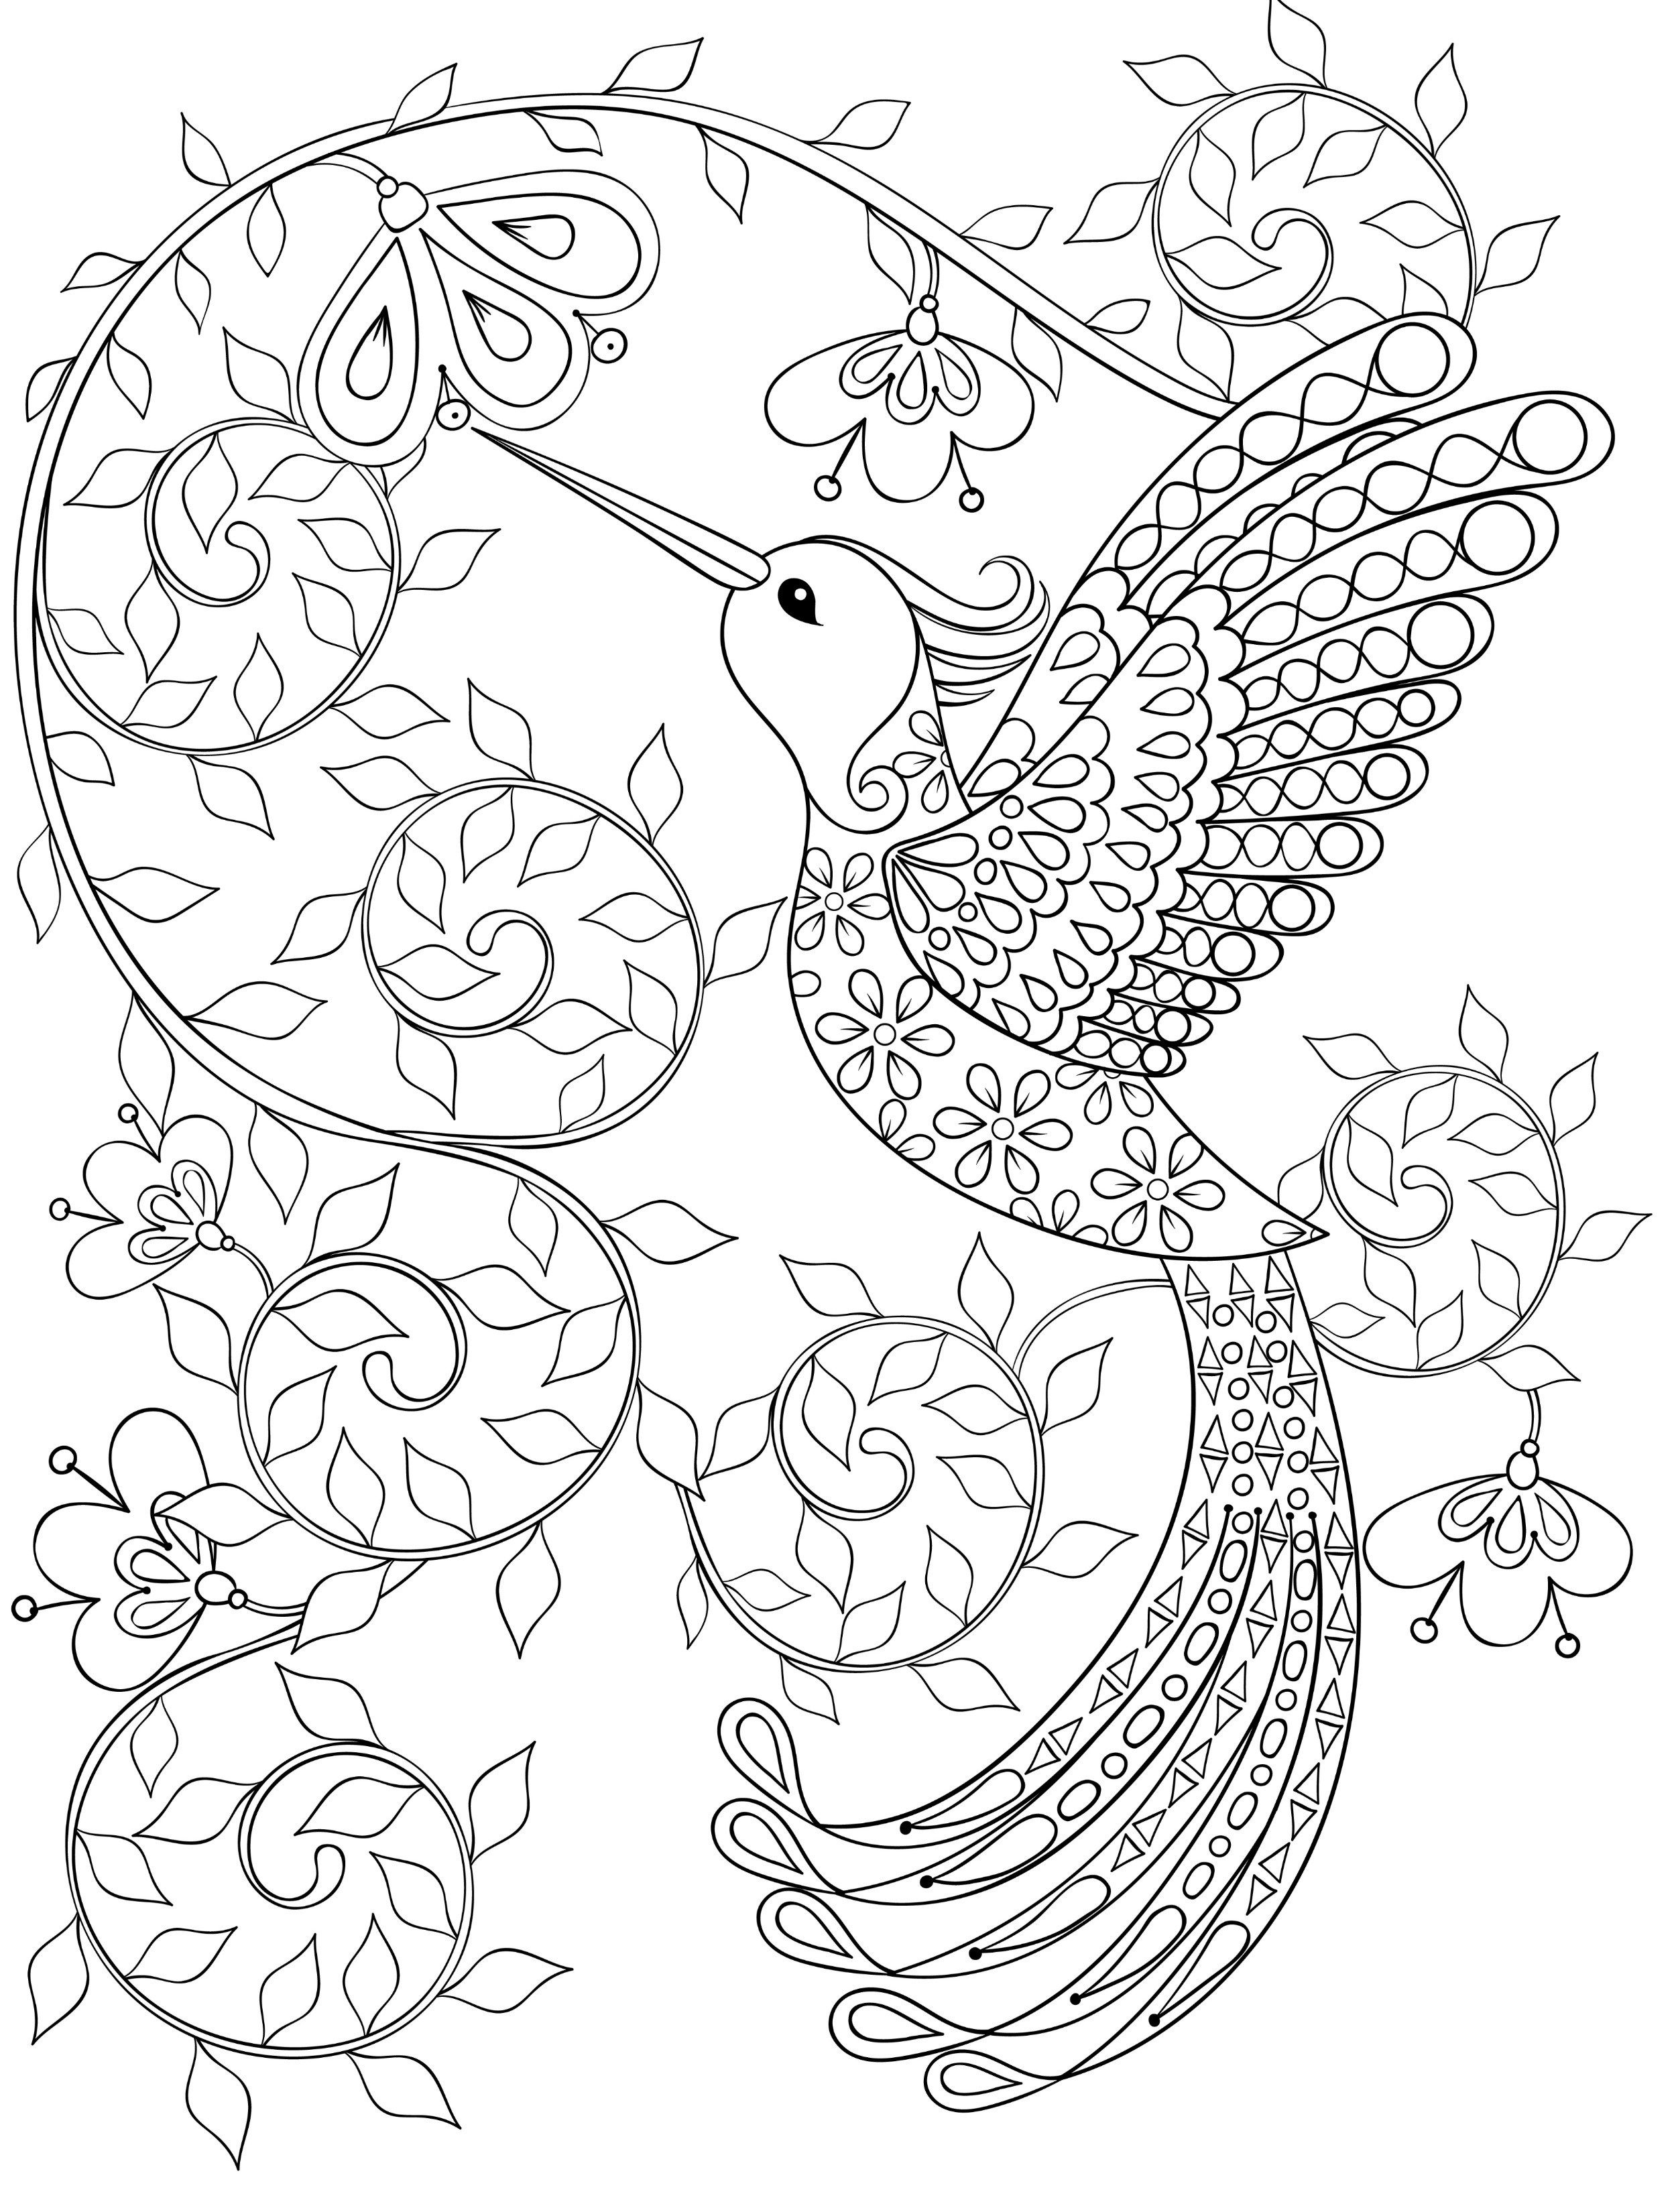 Hummingbird Coloring Pages For Adults, Free Dwonloadable | My Next - Free Printable Pictures Of Hummingbirds